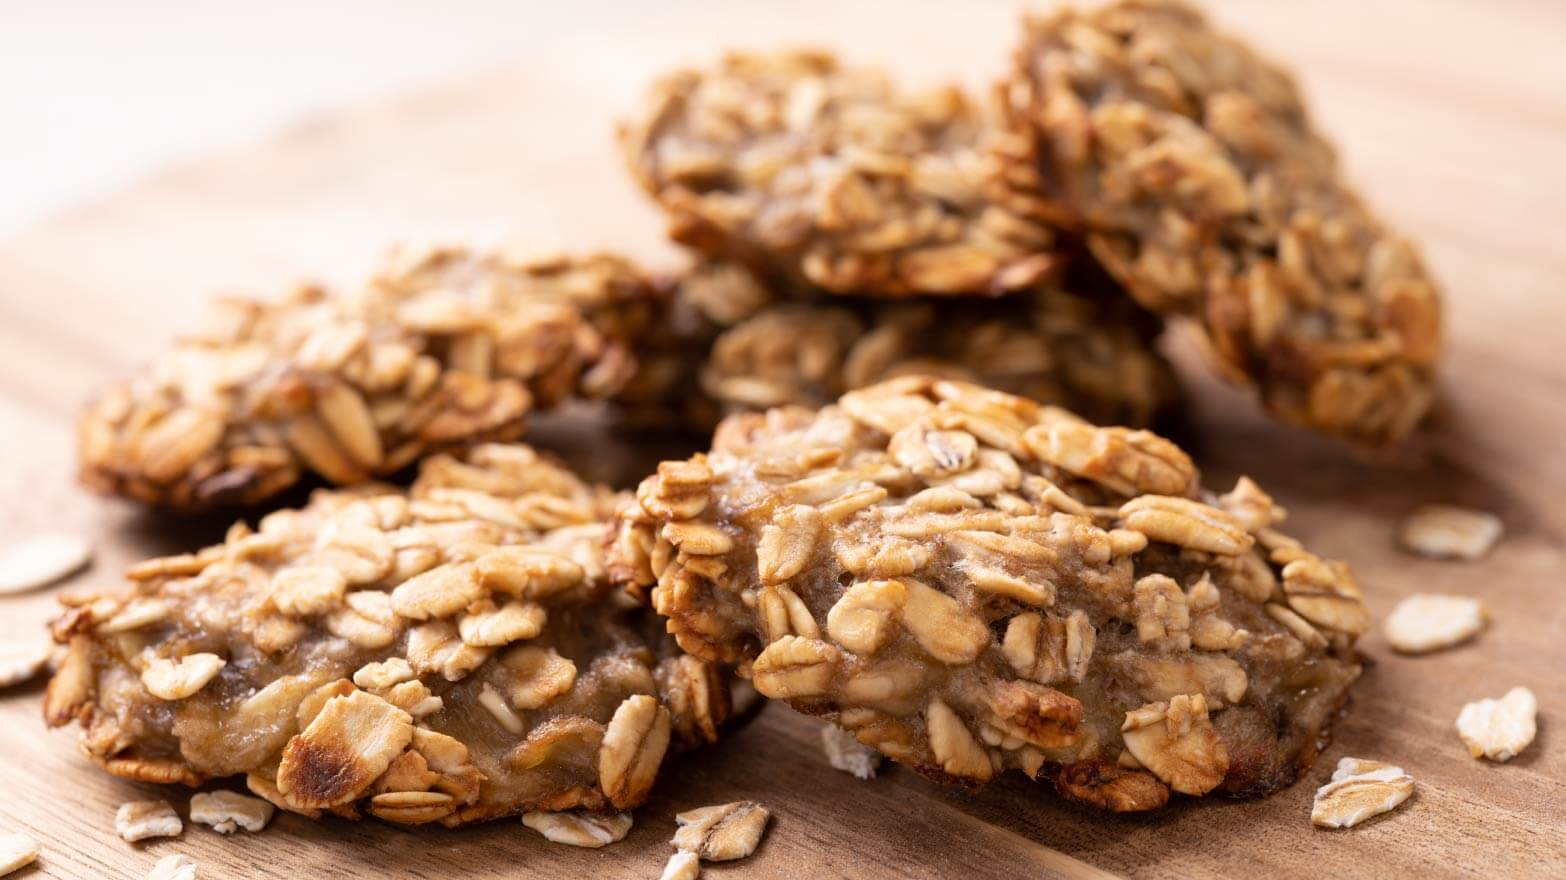 Oatmeal bites for dogs